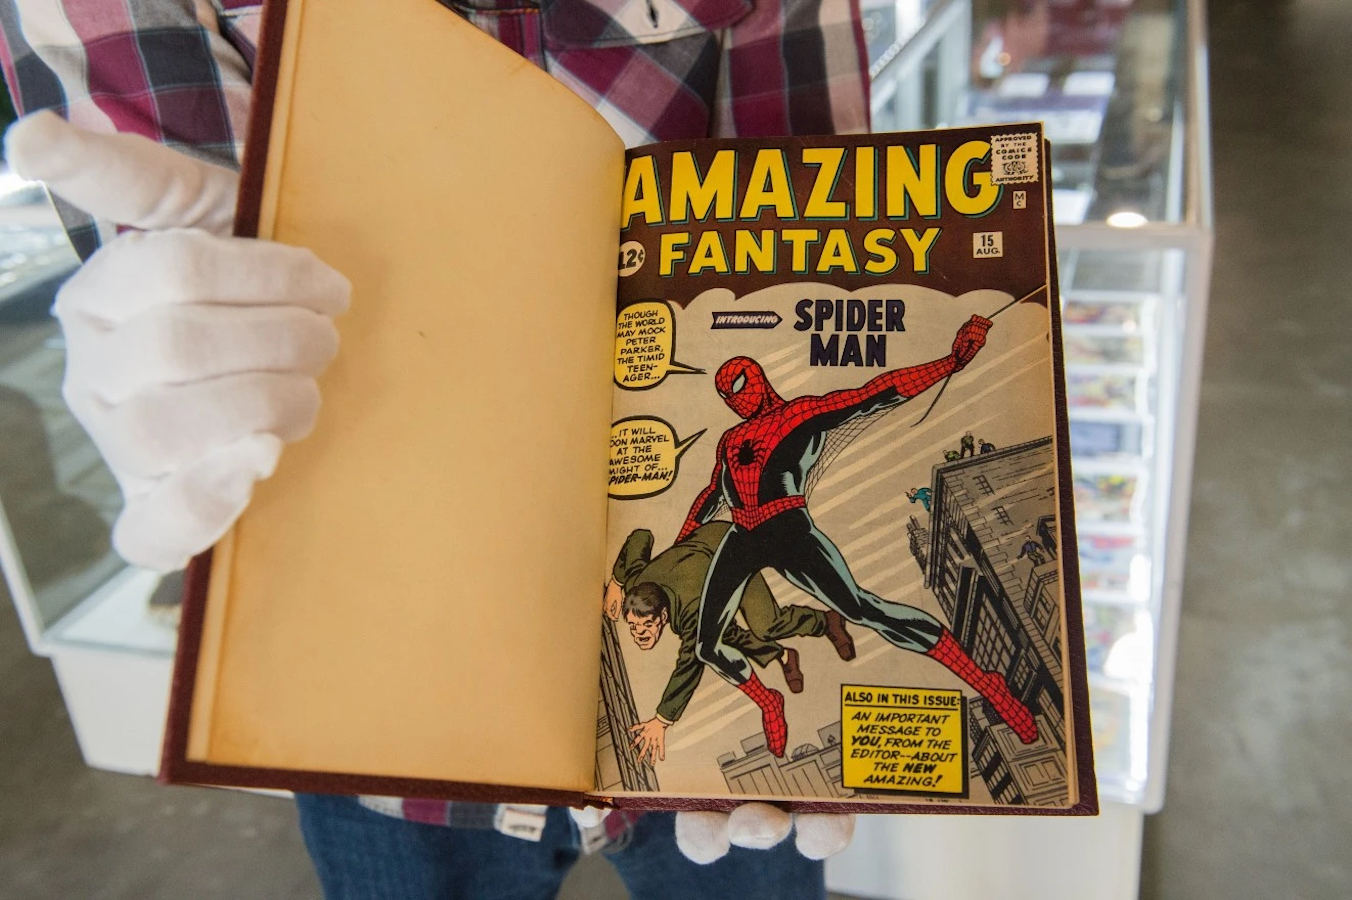 A white-gloved hand gently holds open a protective book that contains a copy of the 1962 Marvel comic wherein Spider-Man makes his debut. The cover reads, "Amazing Fantasy" in bold yellow letters. Spider-Man swings across the center, a string of web in one hand and a flailing man in the other.